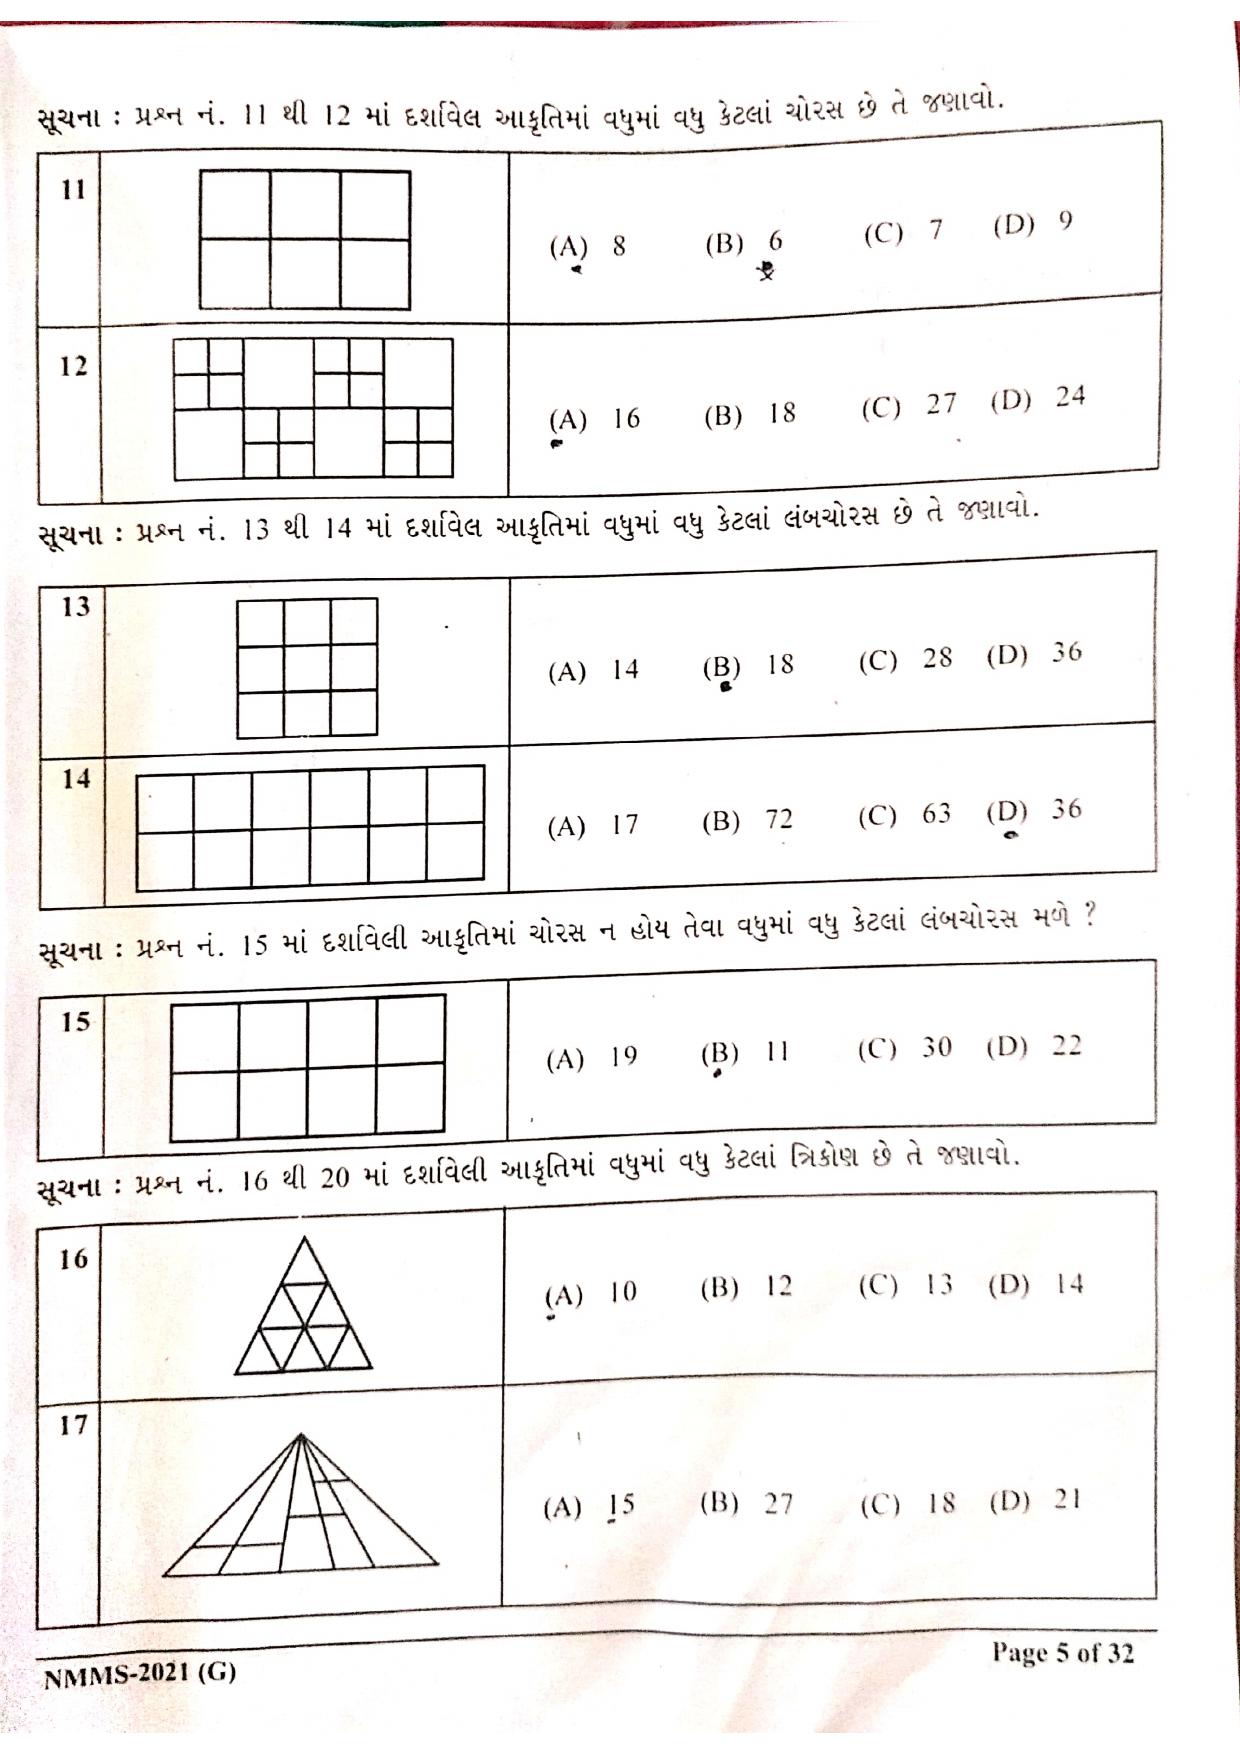 Gujarat NMMS 2021 Question Paper - Page 2